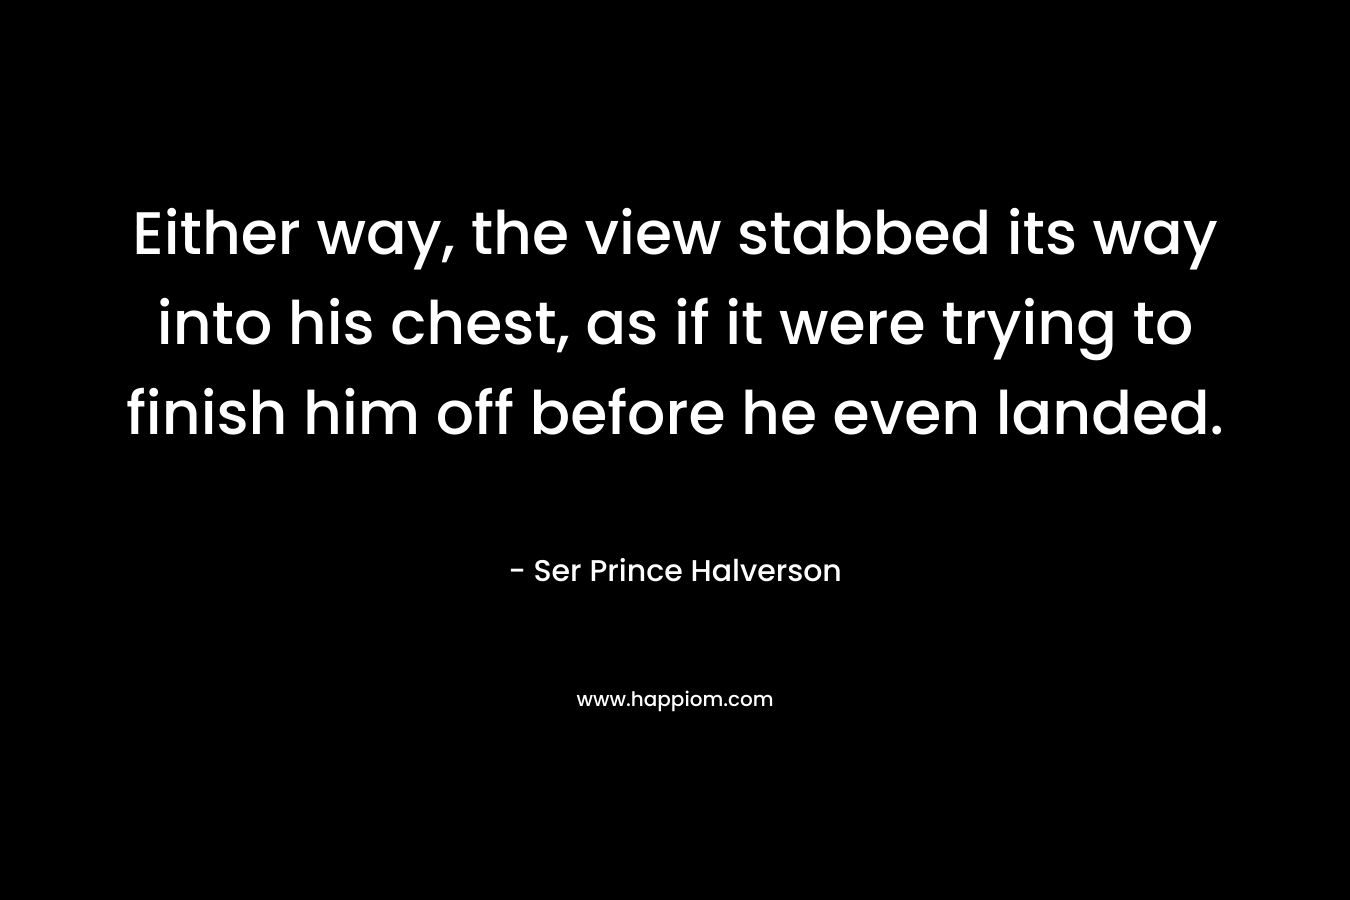 Either way, the view stabbed its way into his chest, as if it were trying to finish him off before he even landed. – Ser Prince Halverson